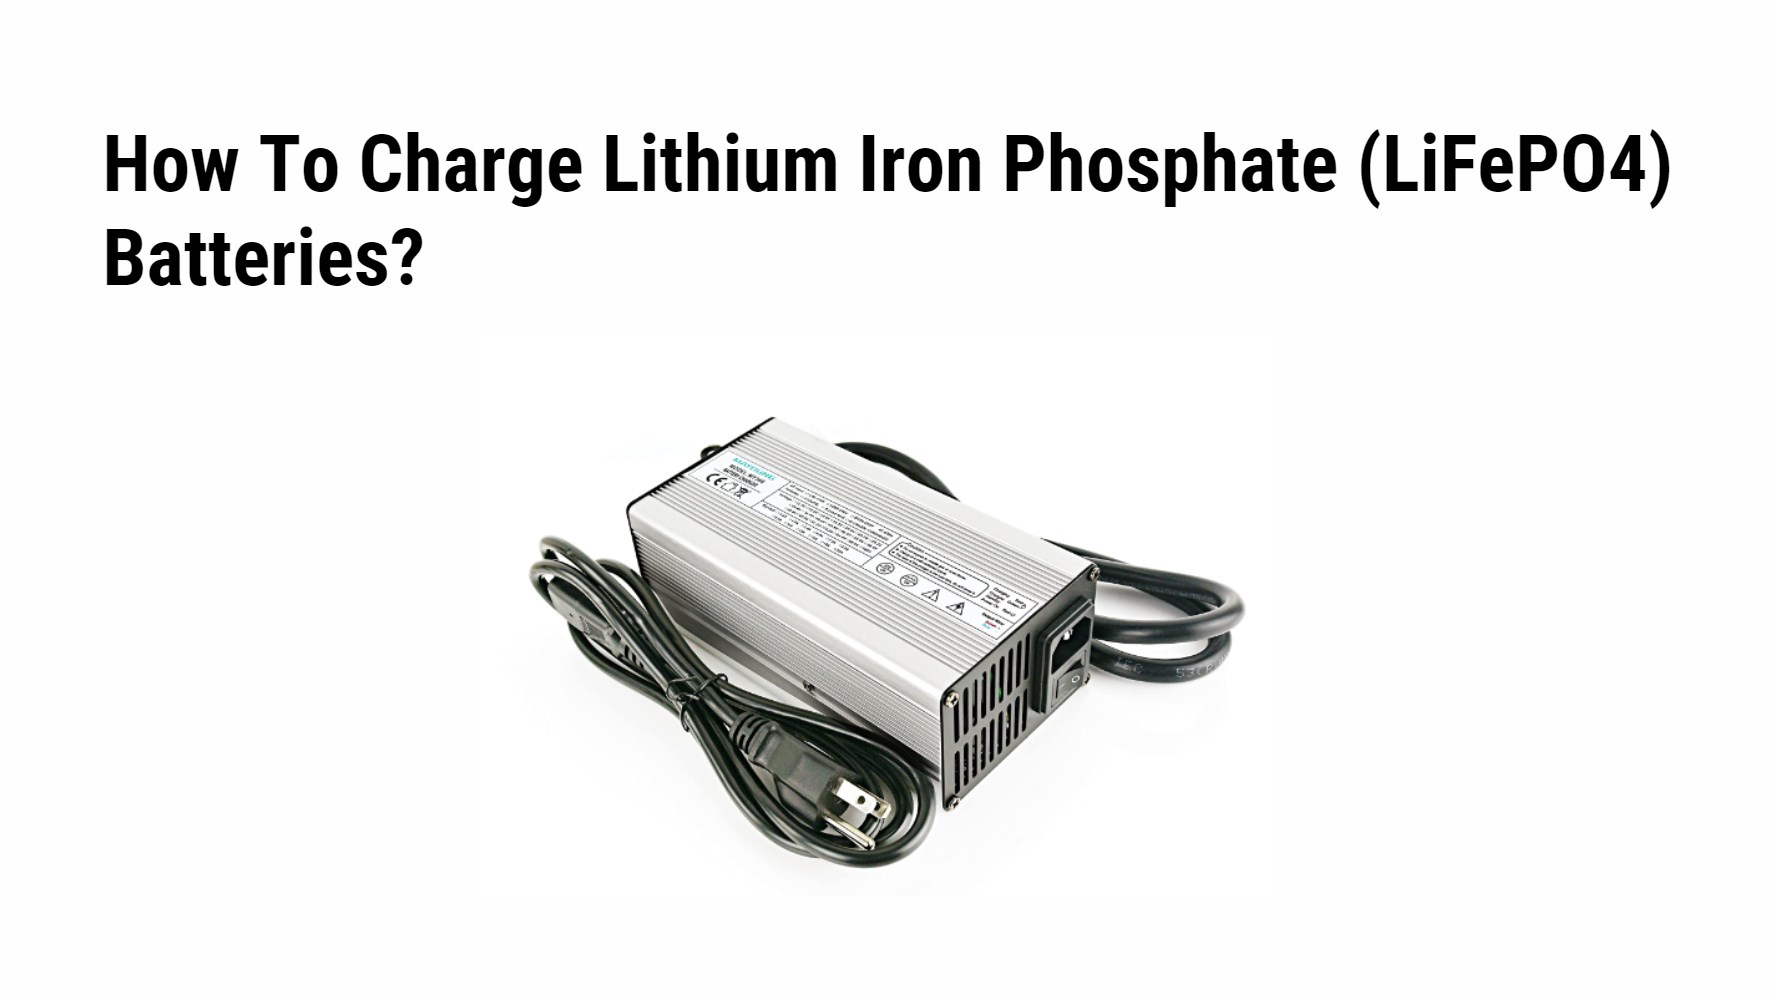 How To Charge Lithium Iron Phosphate (LiFePO4) Batteries?